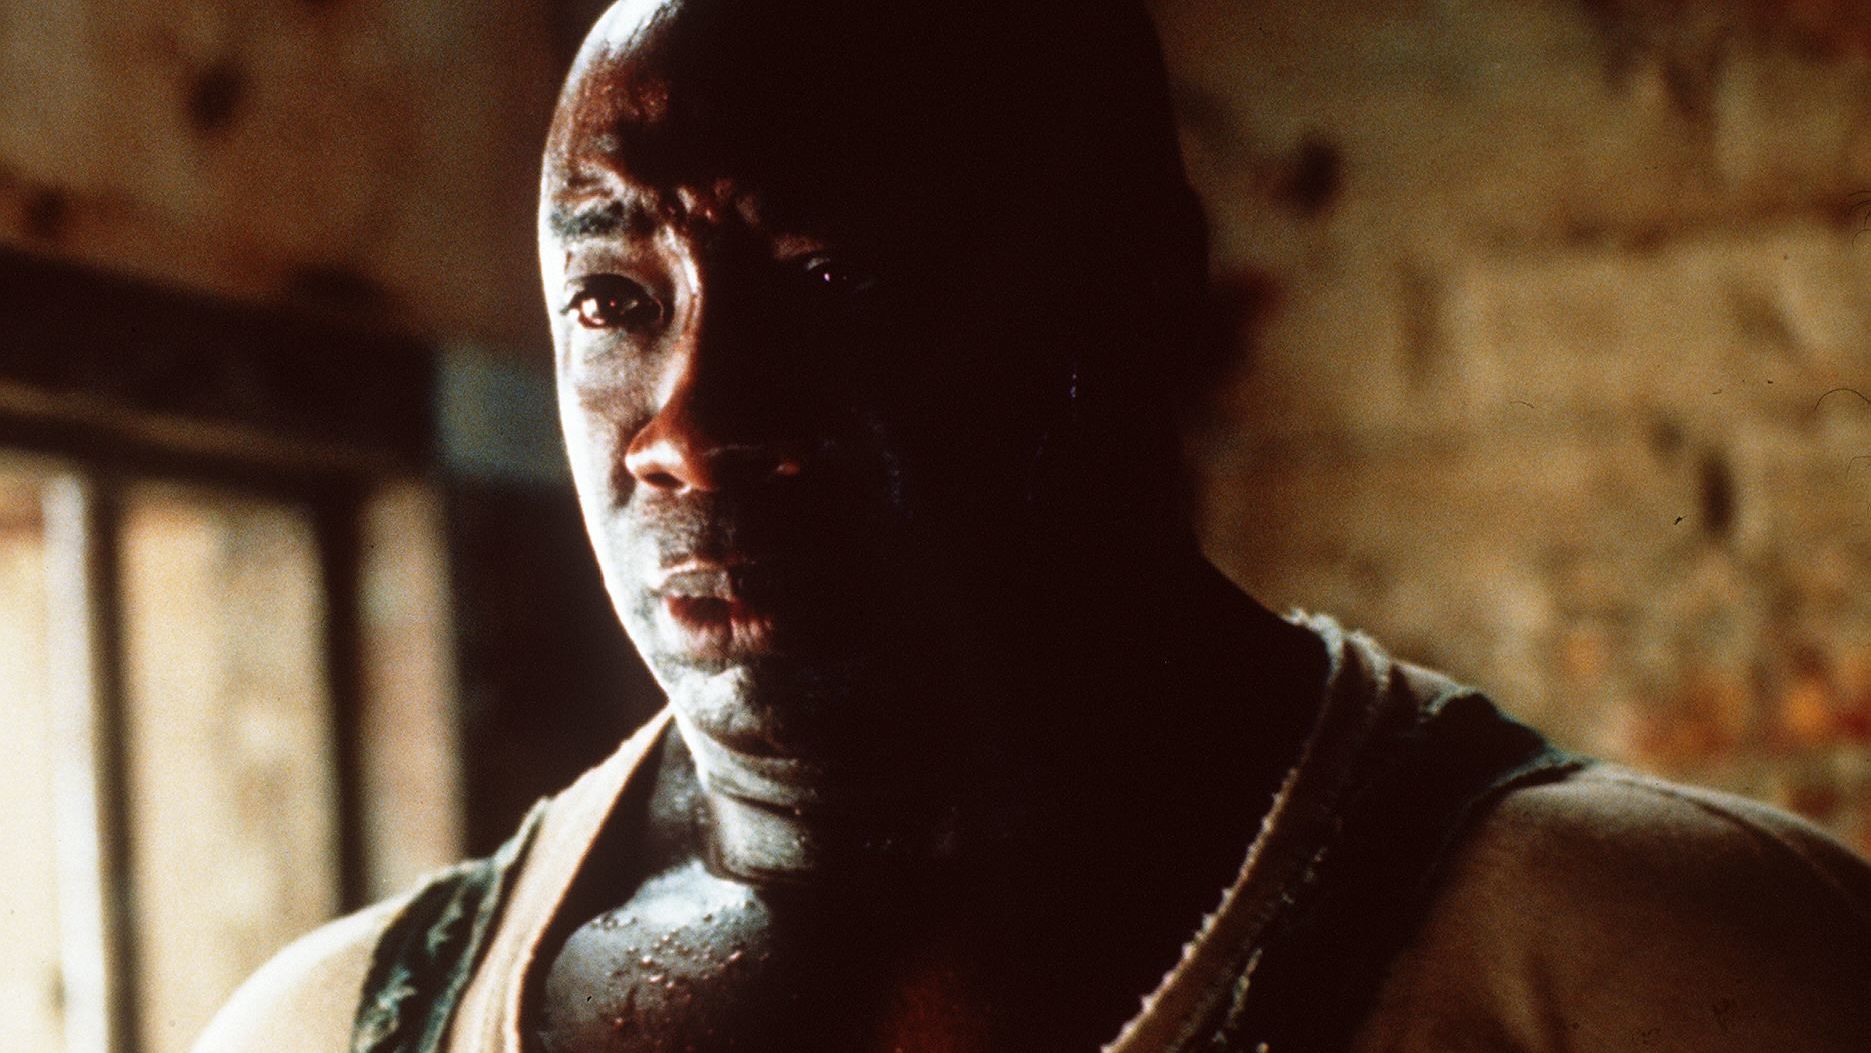 Michael Clarke Duncan earned an Oscar nomination for his role as John Coffey in "The Green Mile."